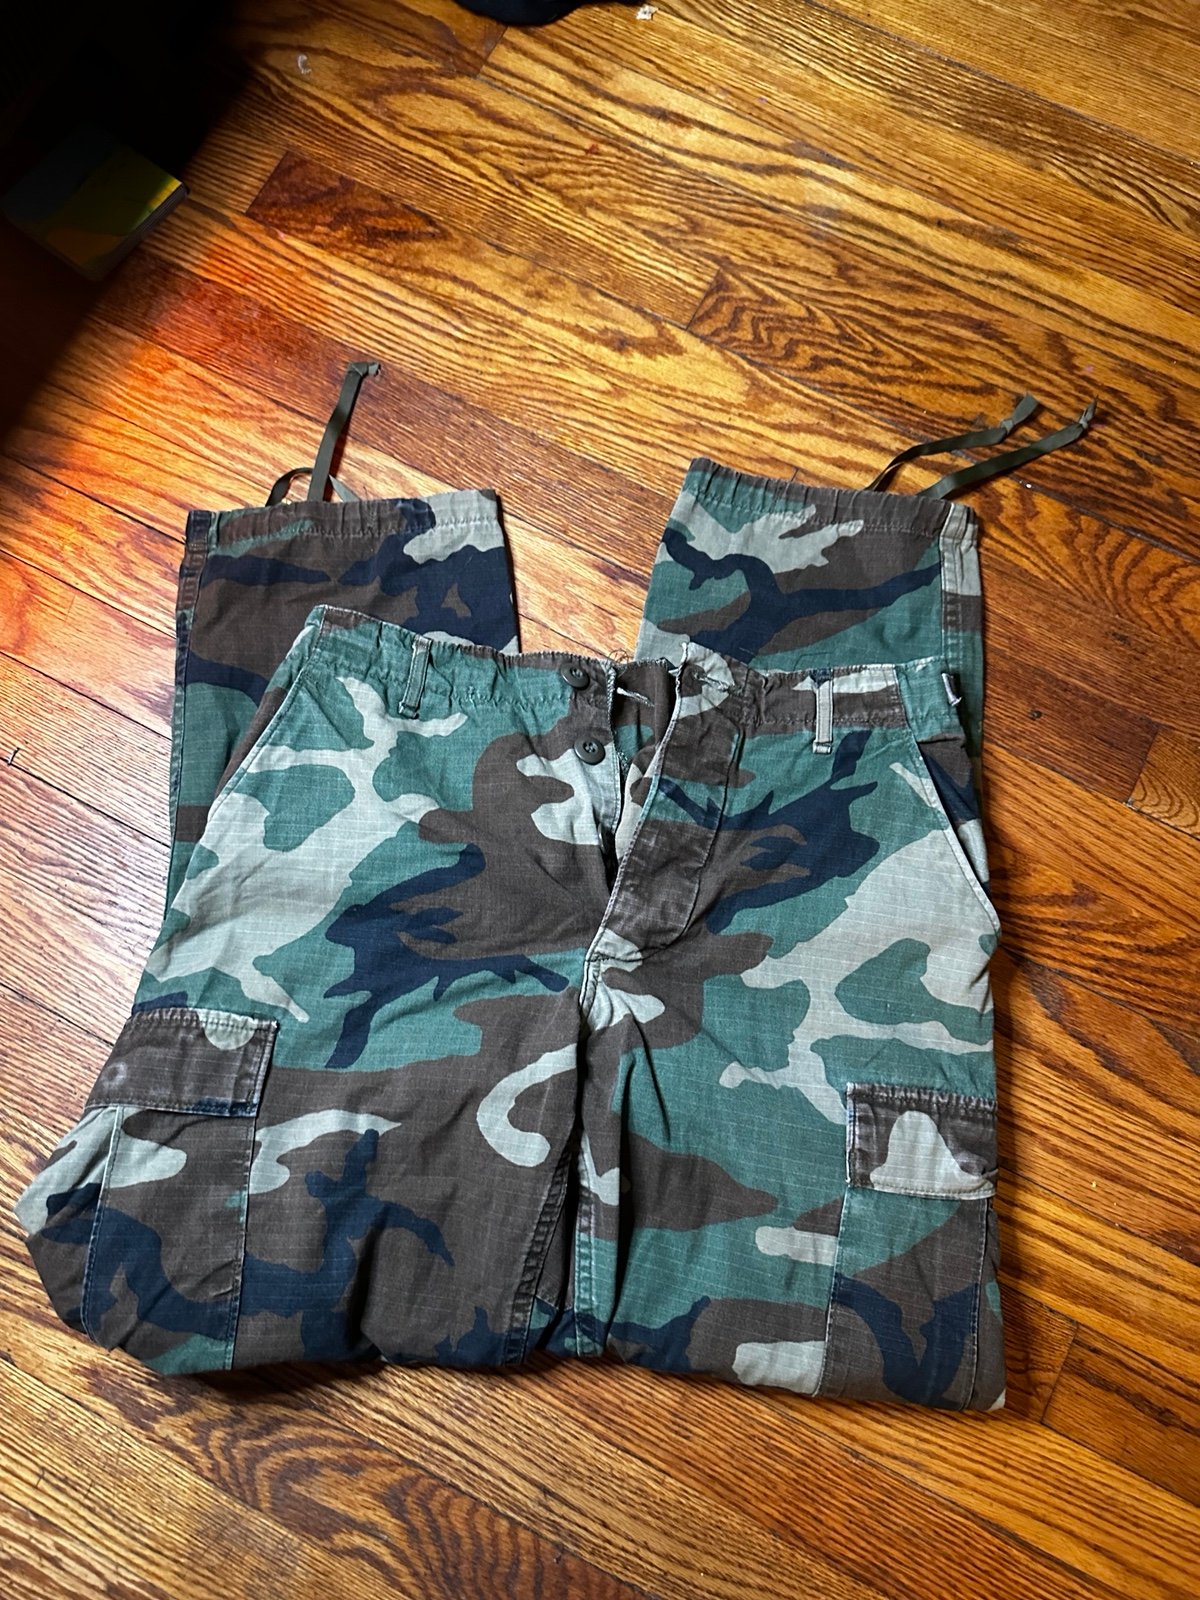 Fashion Military Pants Camo oXRKf98m8 Factory Price